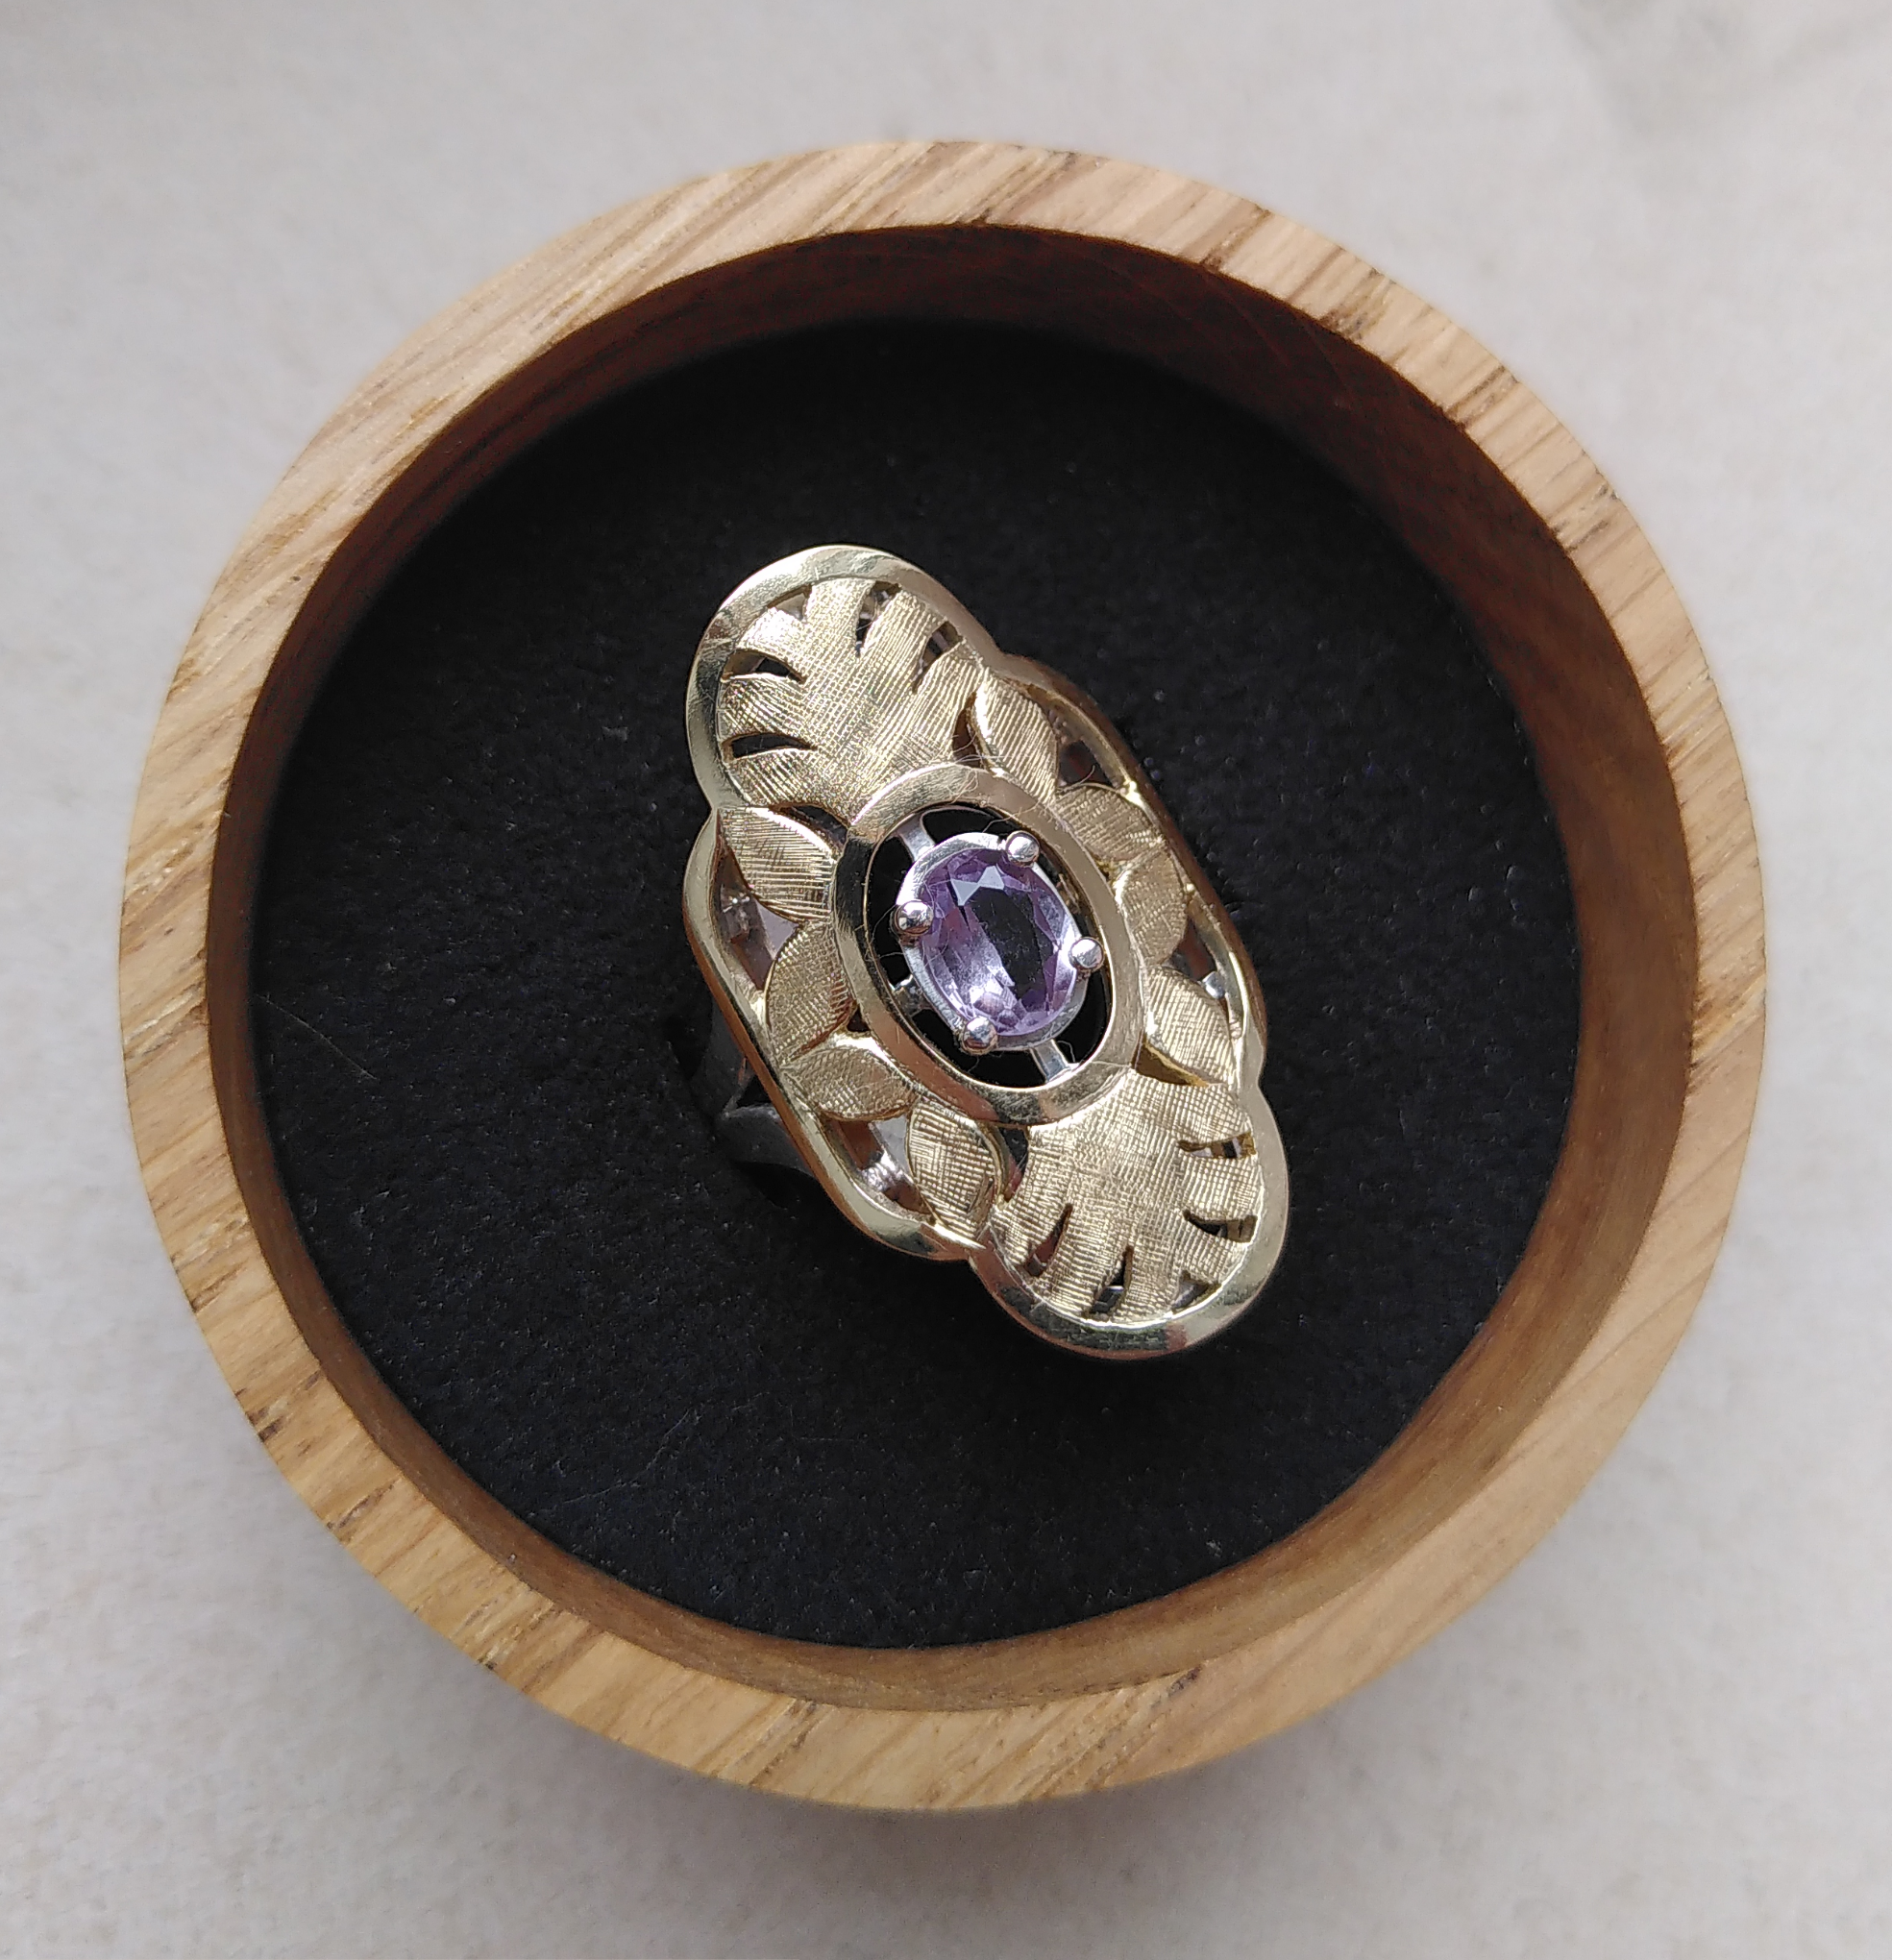 A gold and silver ring. The top plate displays a hand engraved pattern of palm tree leaves and normal leaves. In the middle, a synthetic sapphire is set. The stone is purple under yellow light and turns green under sunlight. Made by hand by Casez Jewellery.